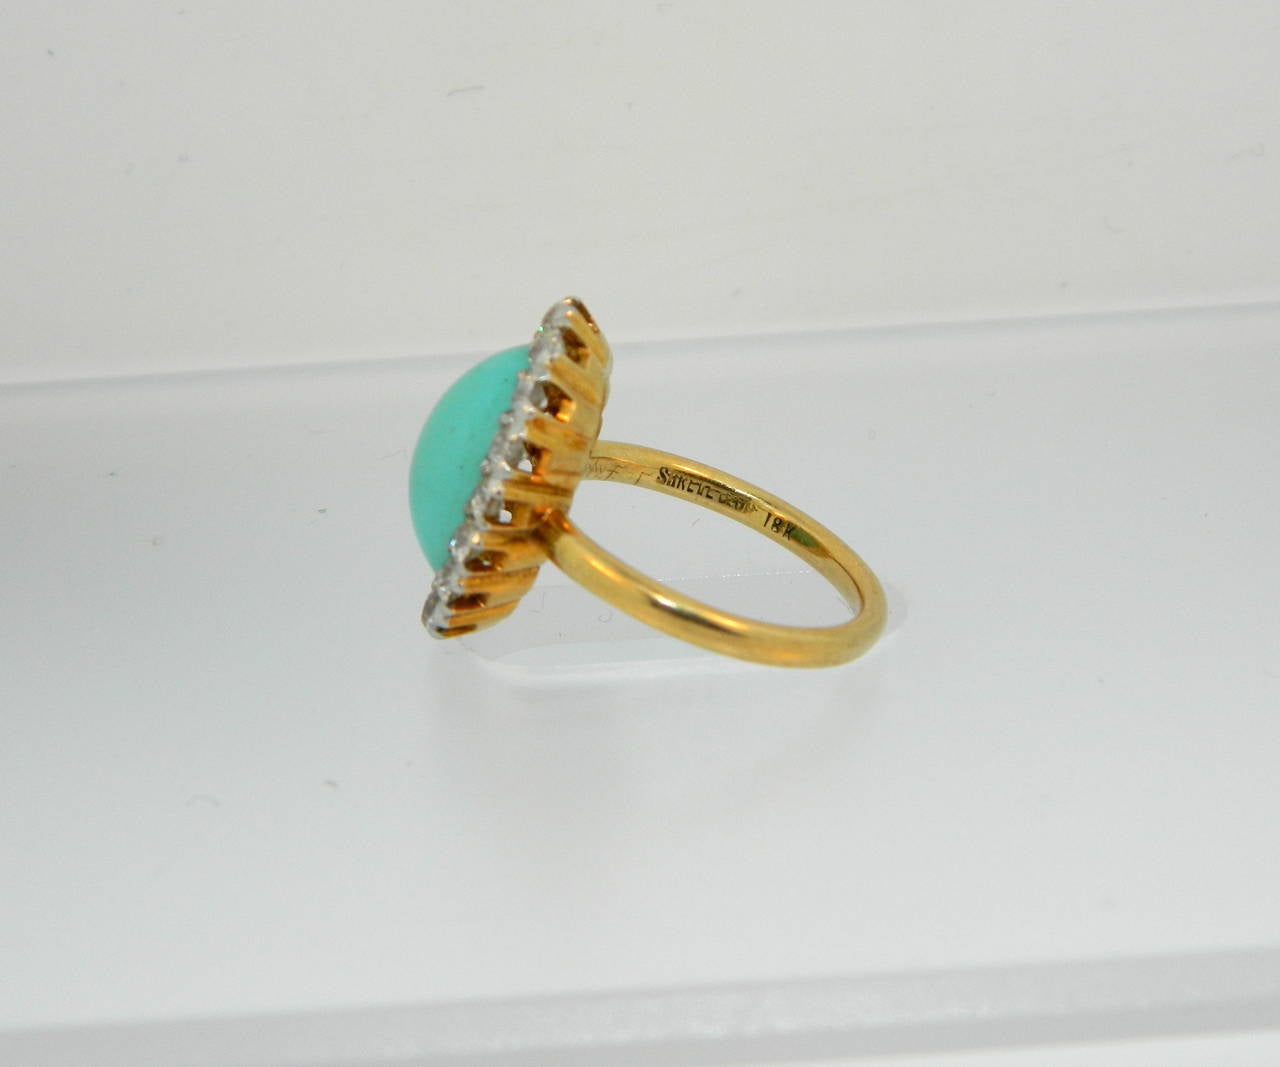 A sweet, early 1900s Turquoise, Diamond, Platinum and Gold cocktail ring by Shreve & Co.